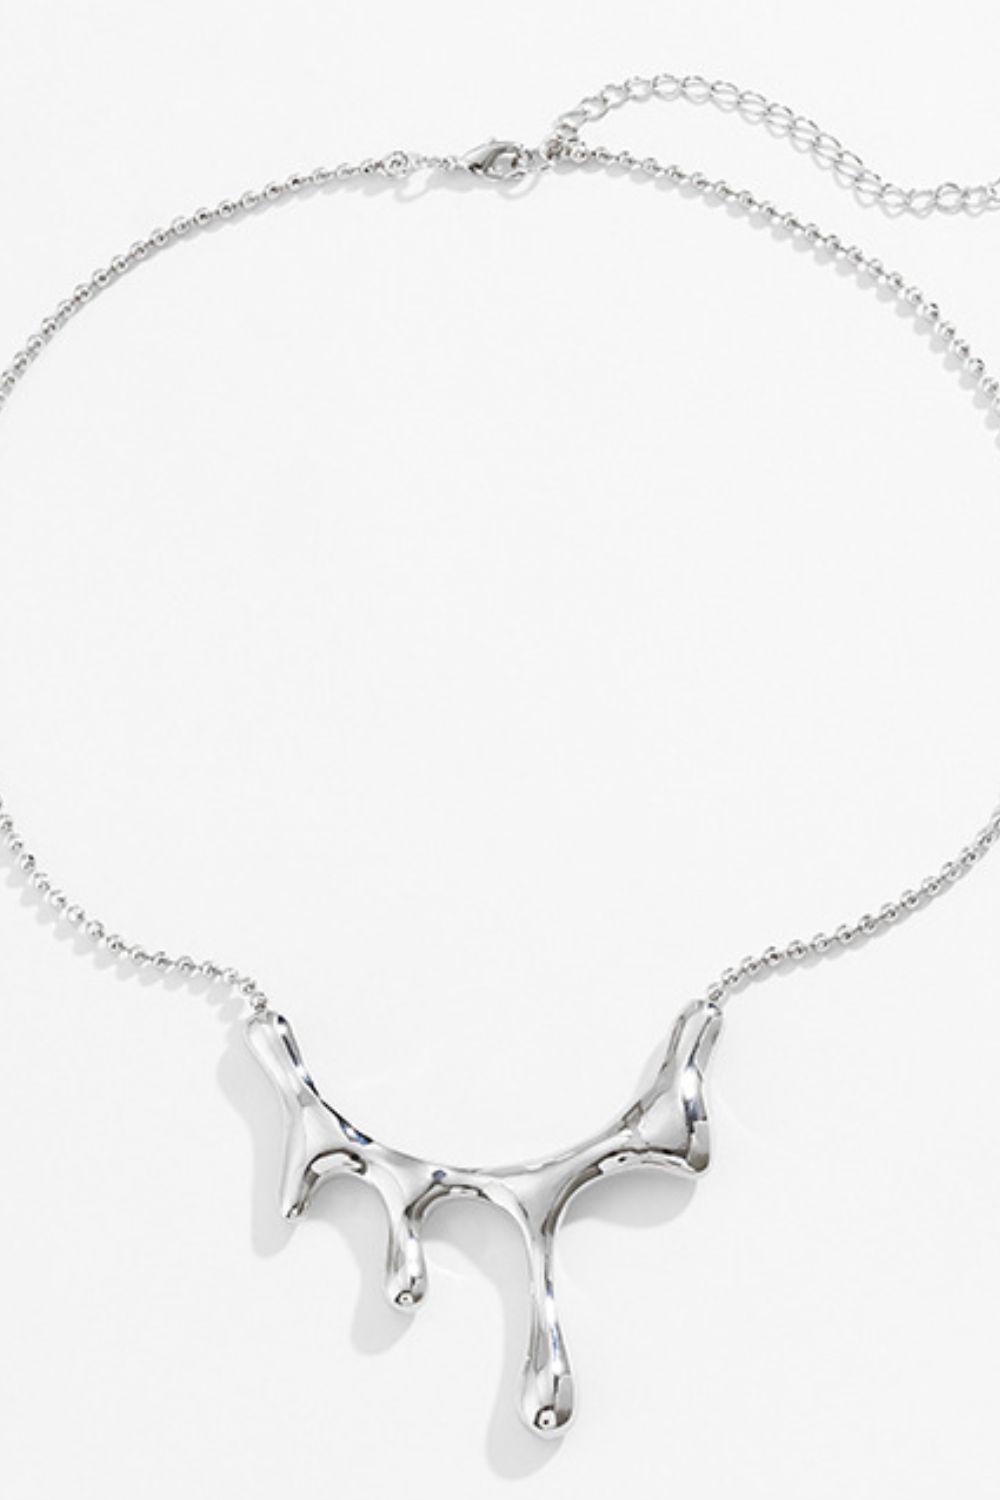 Fashion Lobster Clasp Necklace - Necklaces - FITGGINS